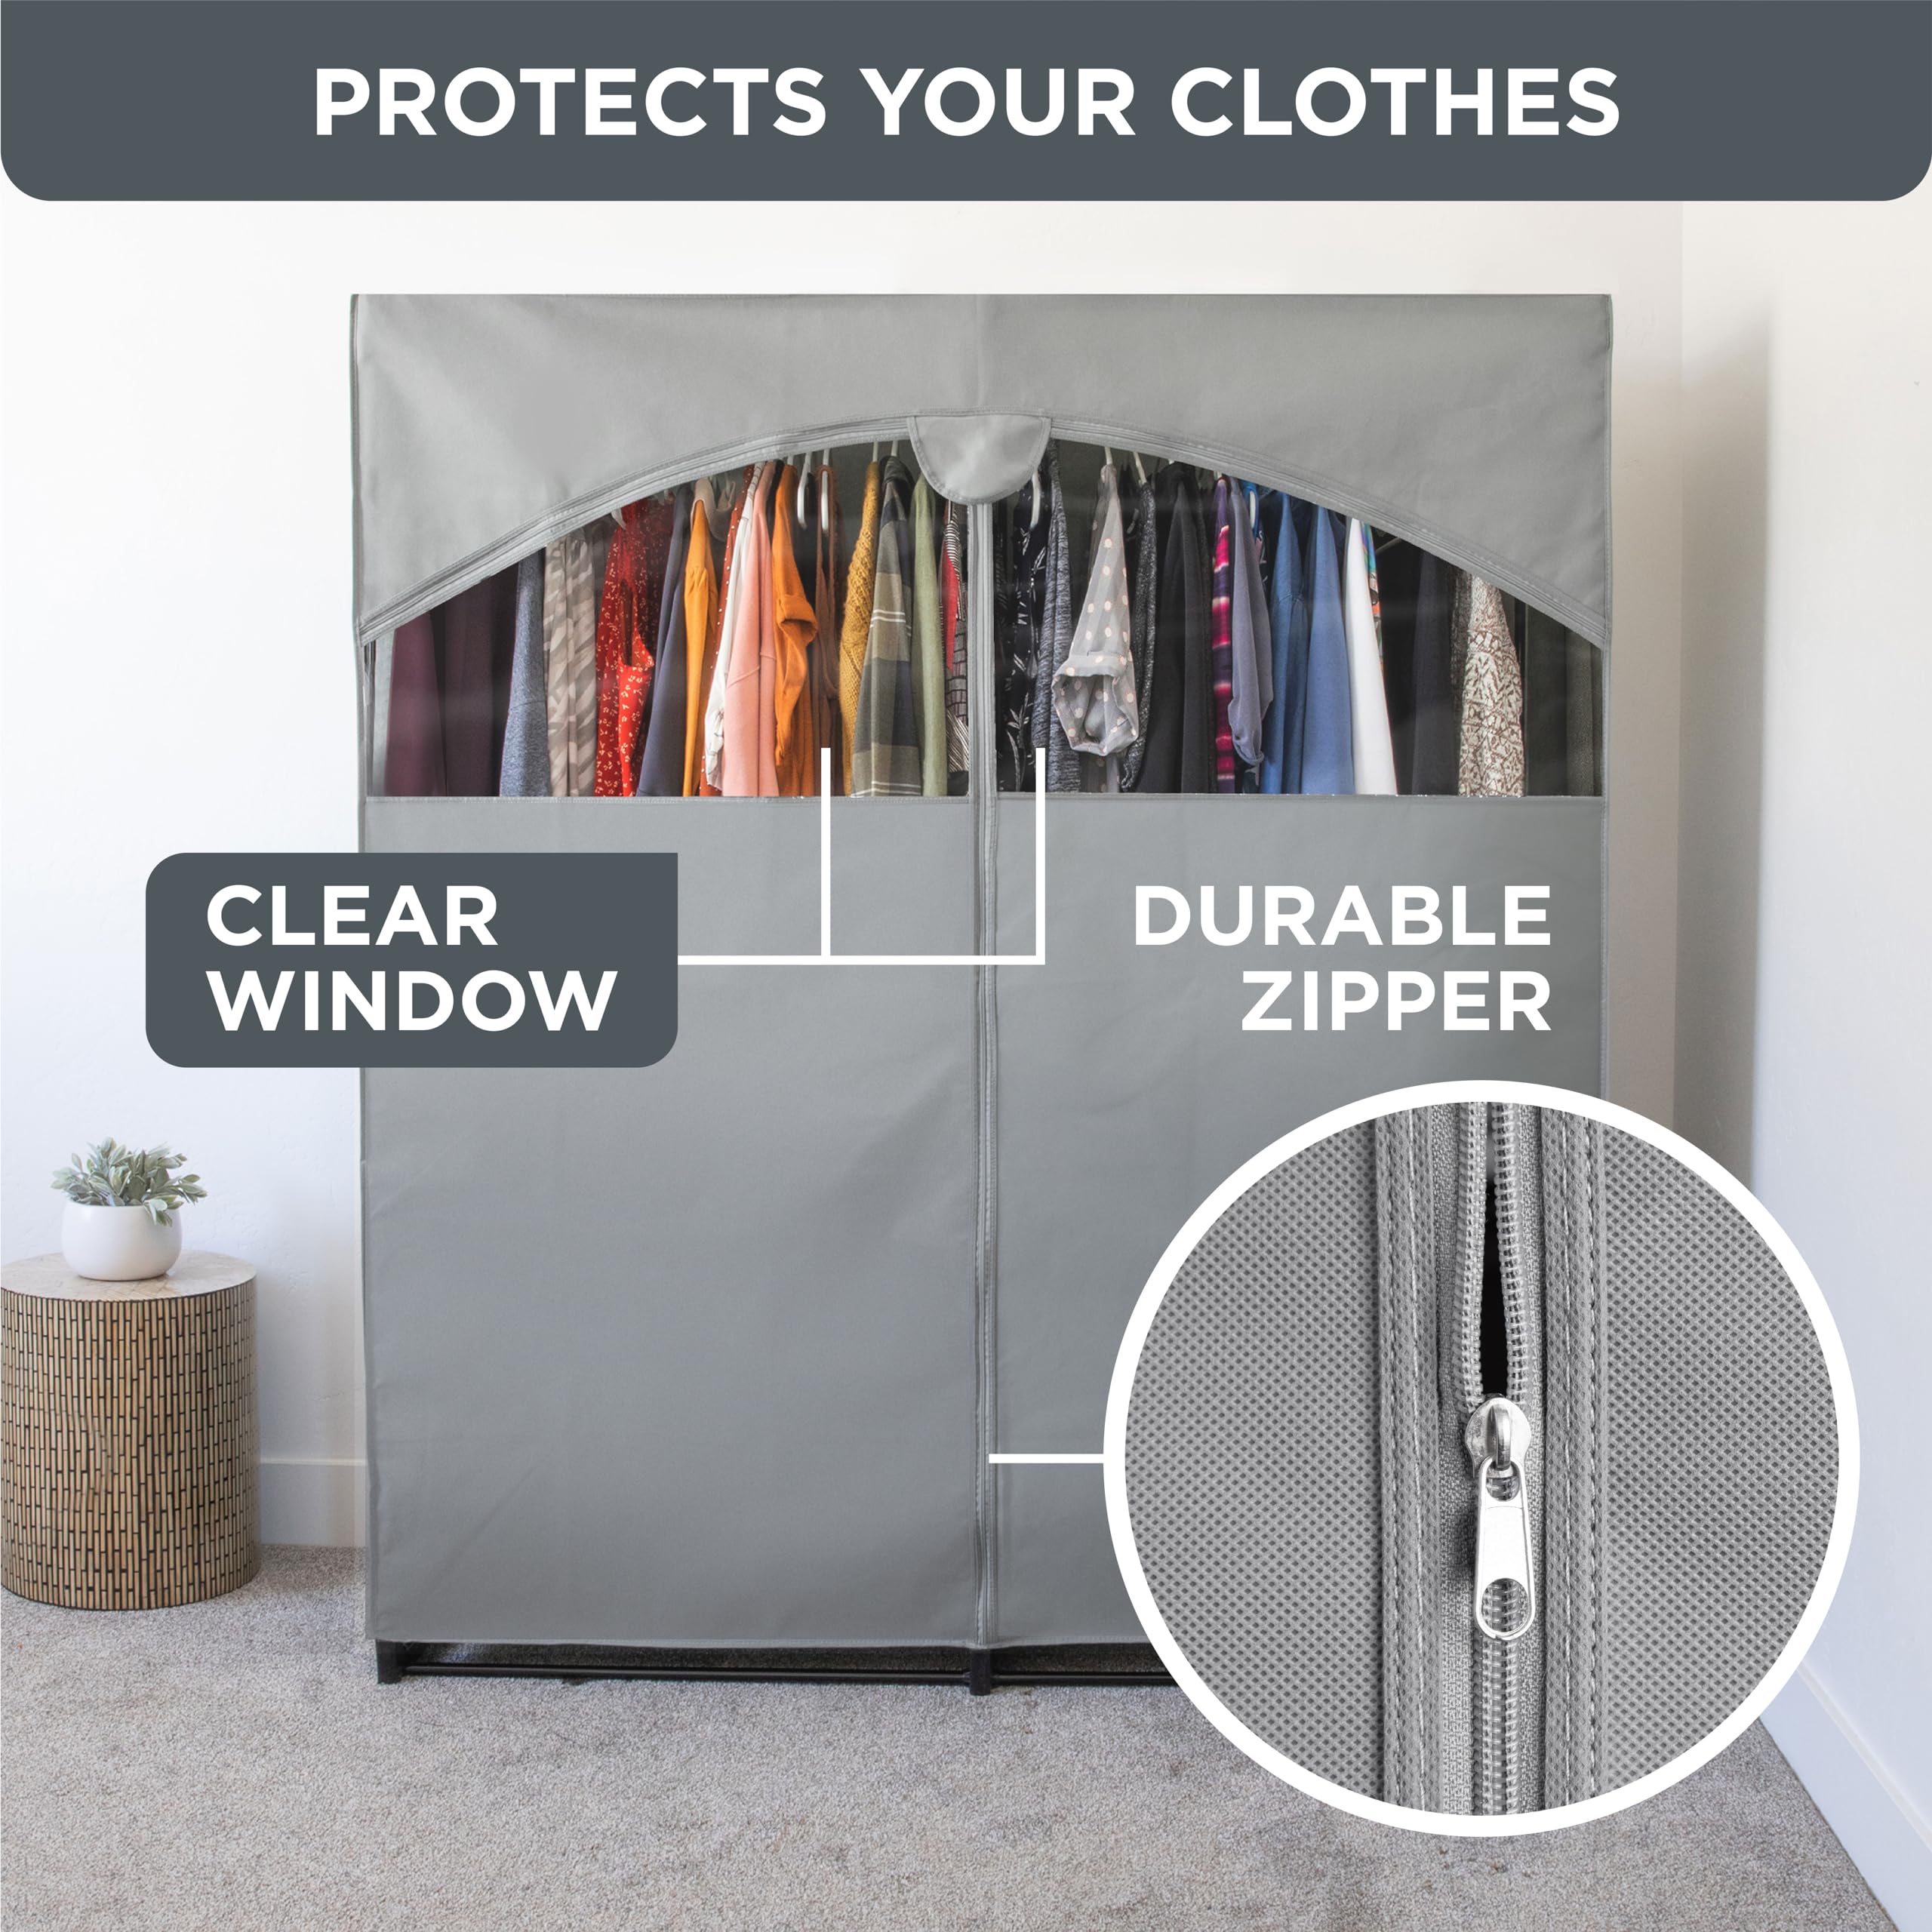 Portable Wardrobe Closet, Heavy Duty Hanging Rod with 50 Lb. Weight Capacity, Super Easy Assembly, No Tools Required